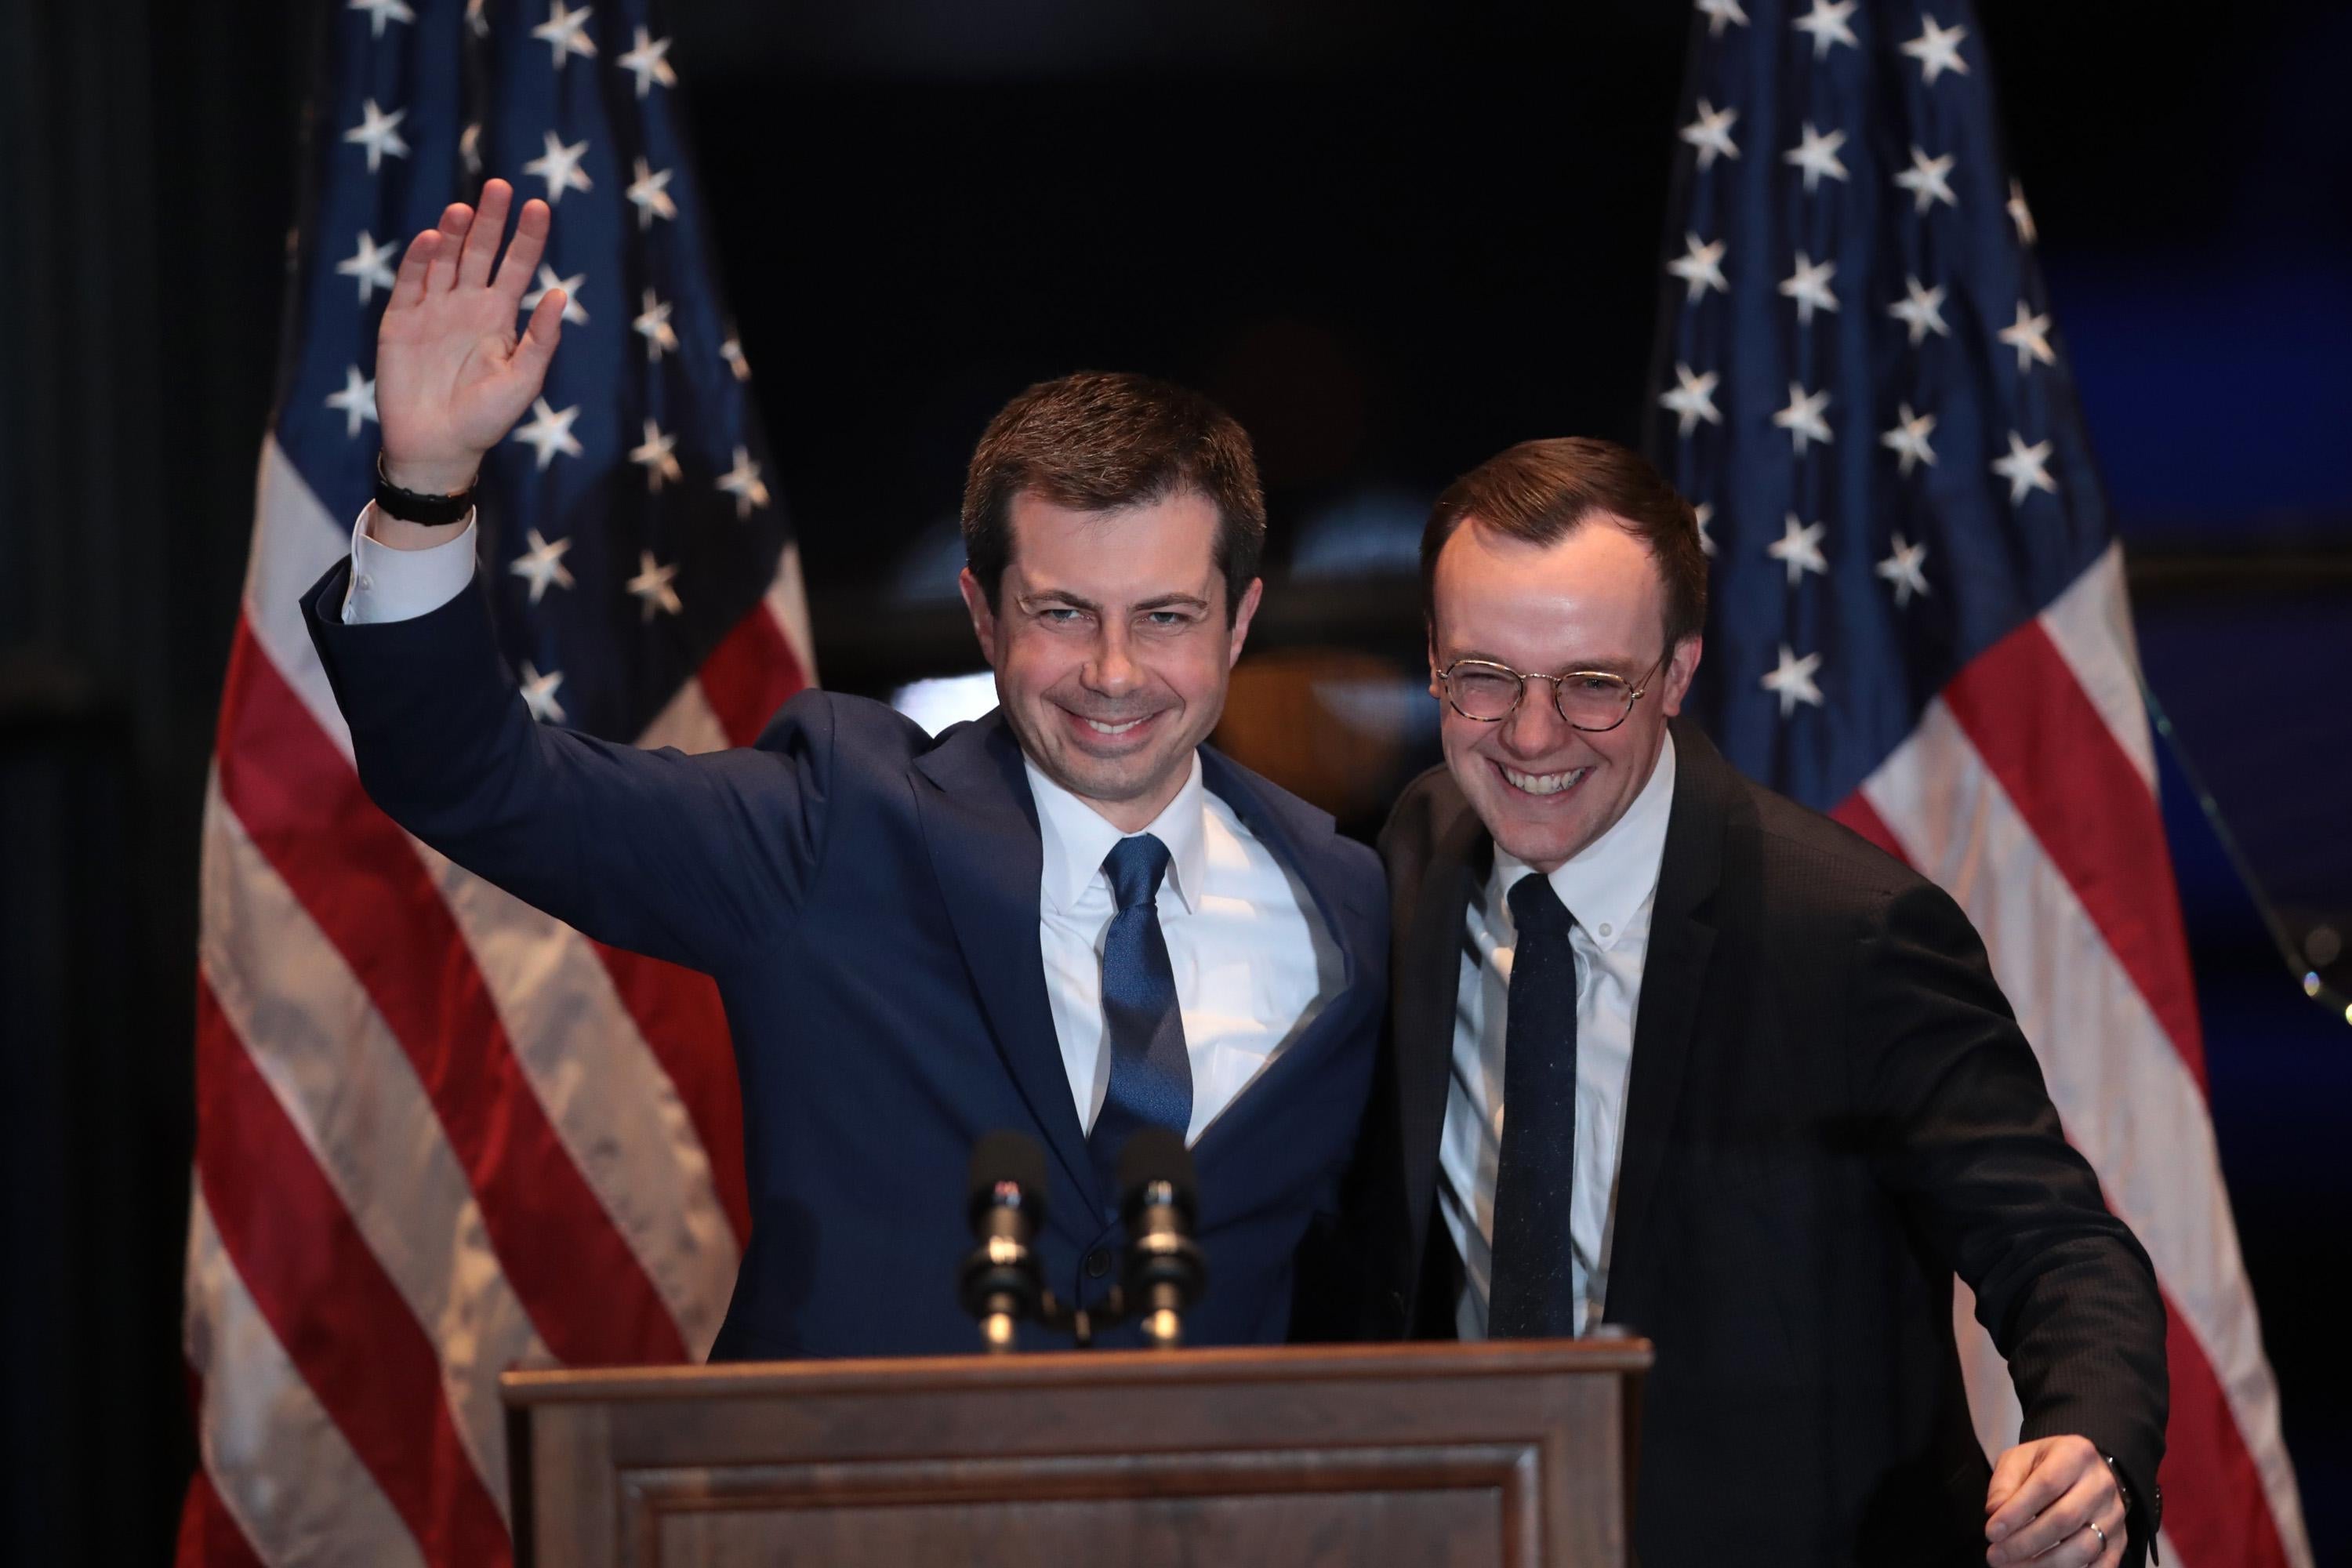 Pete and Chasten Buttigieg hugging and waving in front of American flags